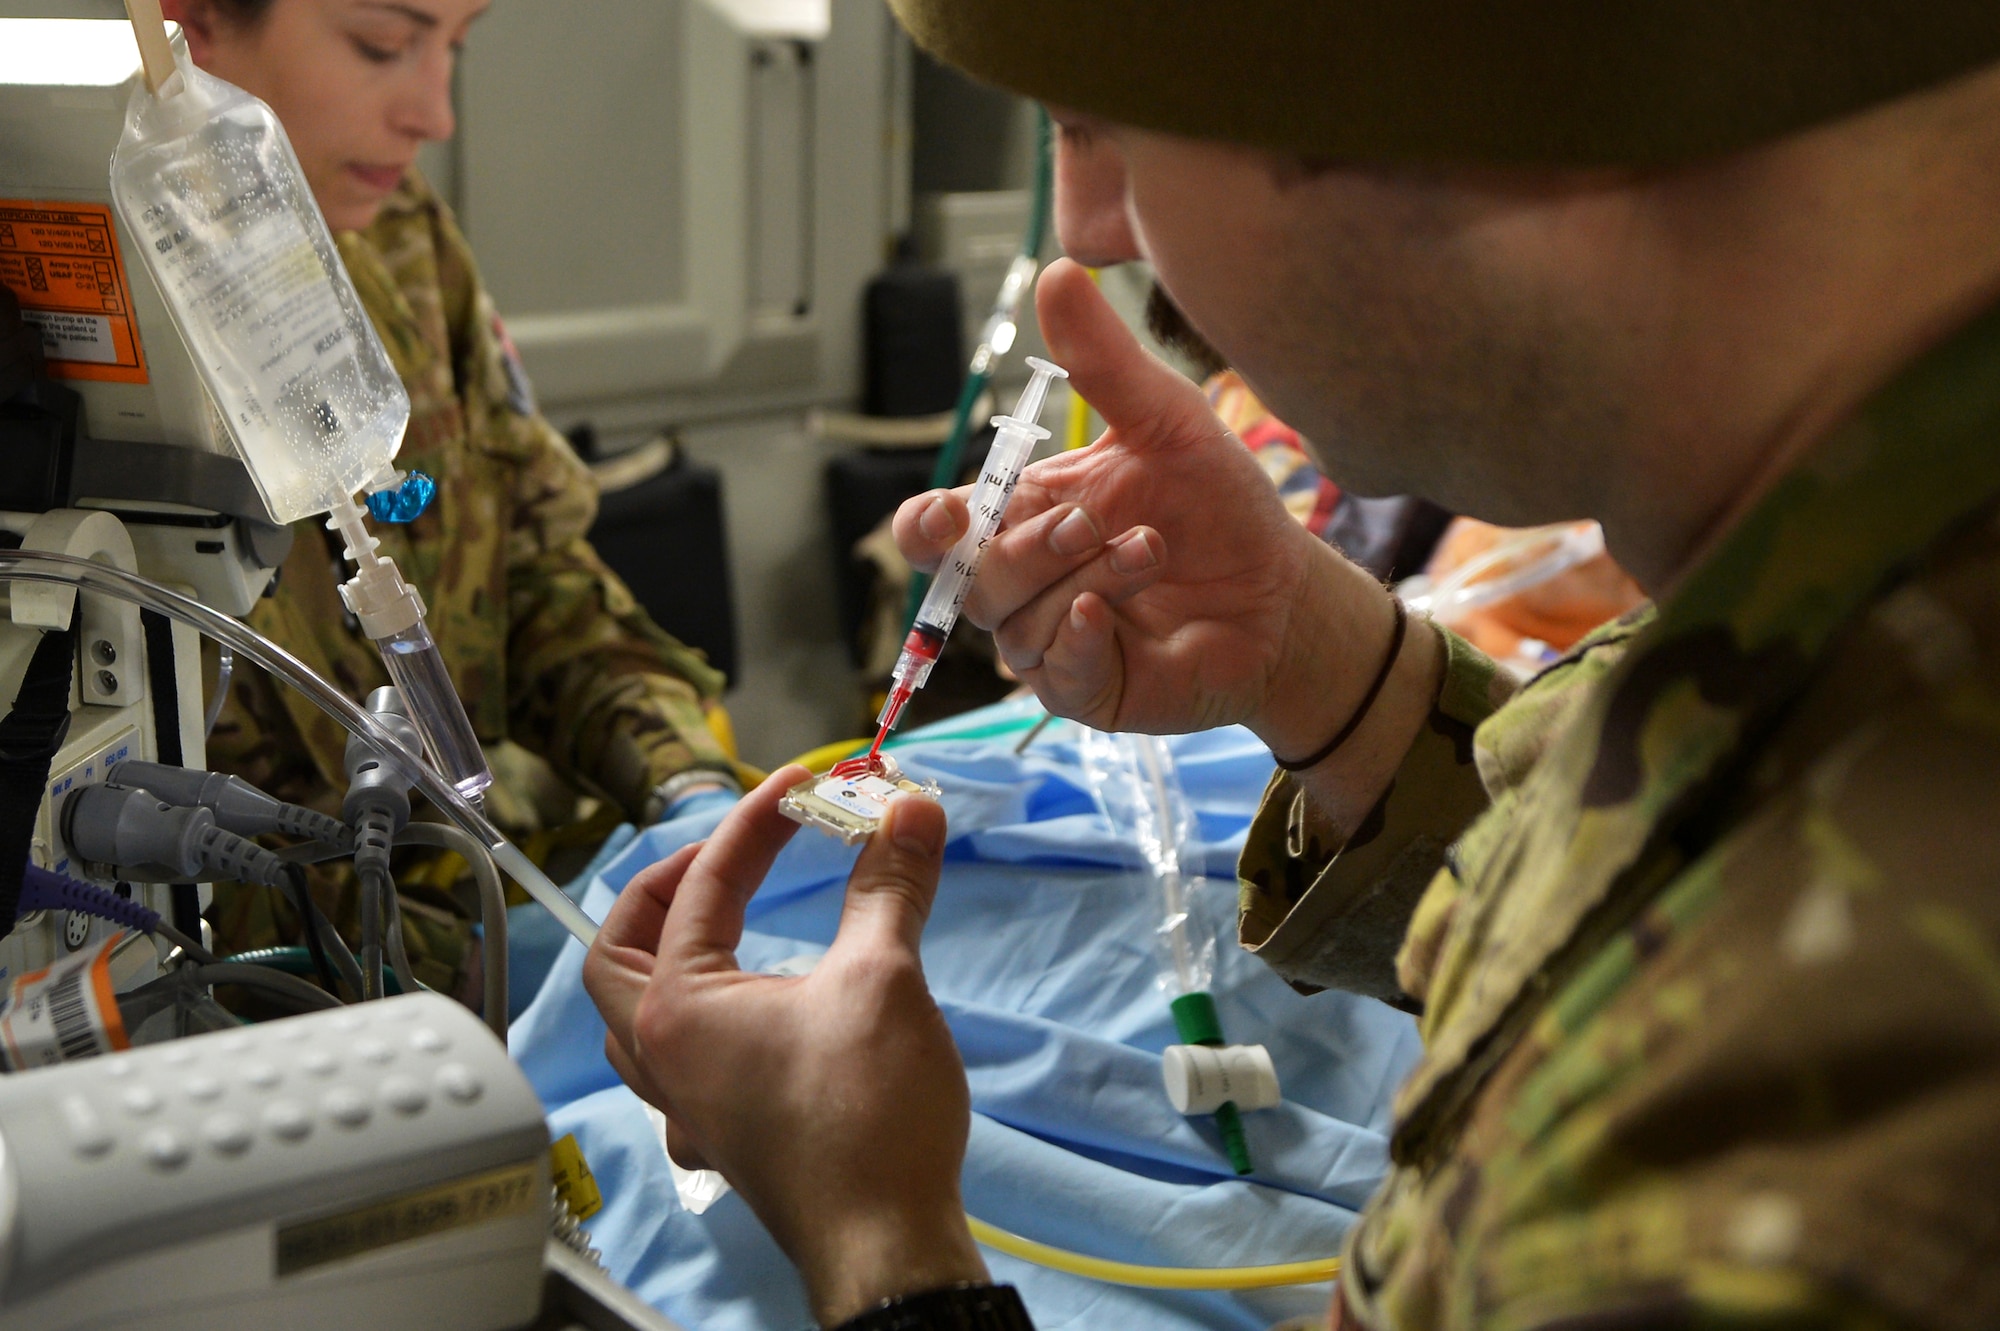 Senior Airman Delton McClary, 455th Expeditionary Aeromedical Evacuation Squadron Critical Care Air Transport Team respiratory therapist, performs an arterial blood gas sampling during flight out of Bagram Airfield, Afghanistan, March 21, 2013.  The results will be used to monitor the patient's hemoglobin and electrolyte levels and guide further resuscitation during the flight.  (U.S. Air Force photo/Senior Airman Chris Willis)